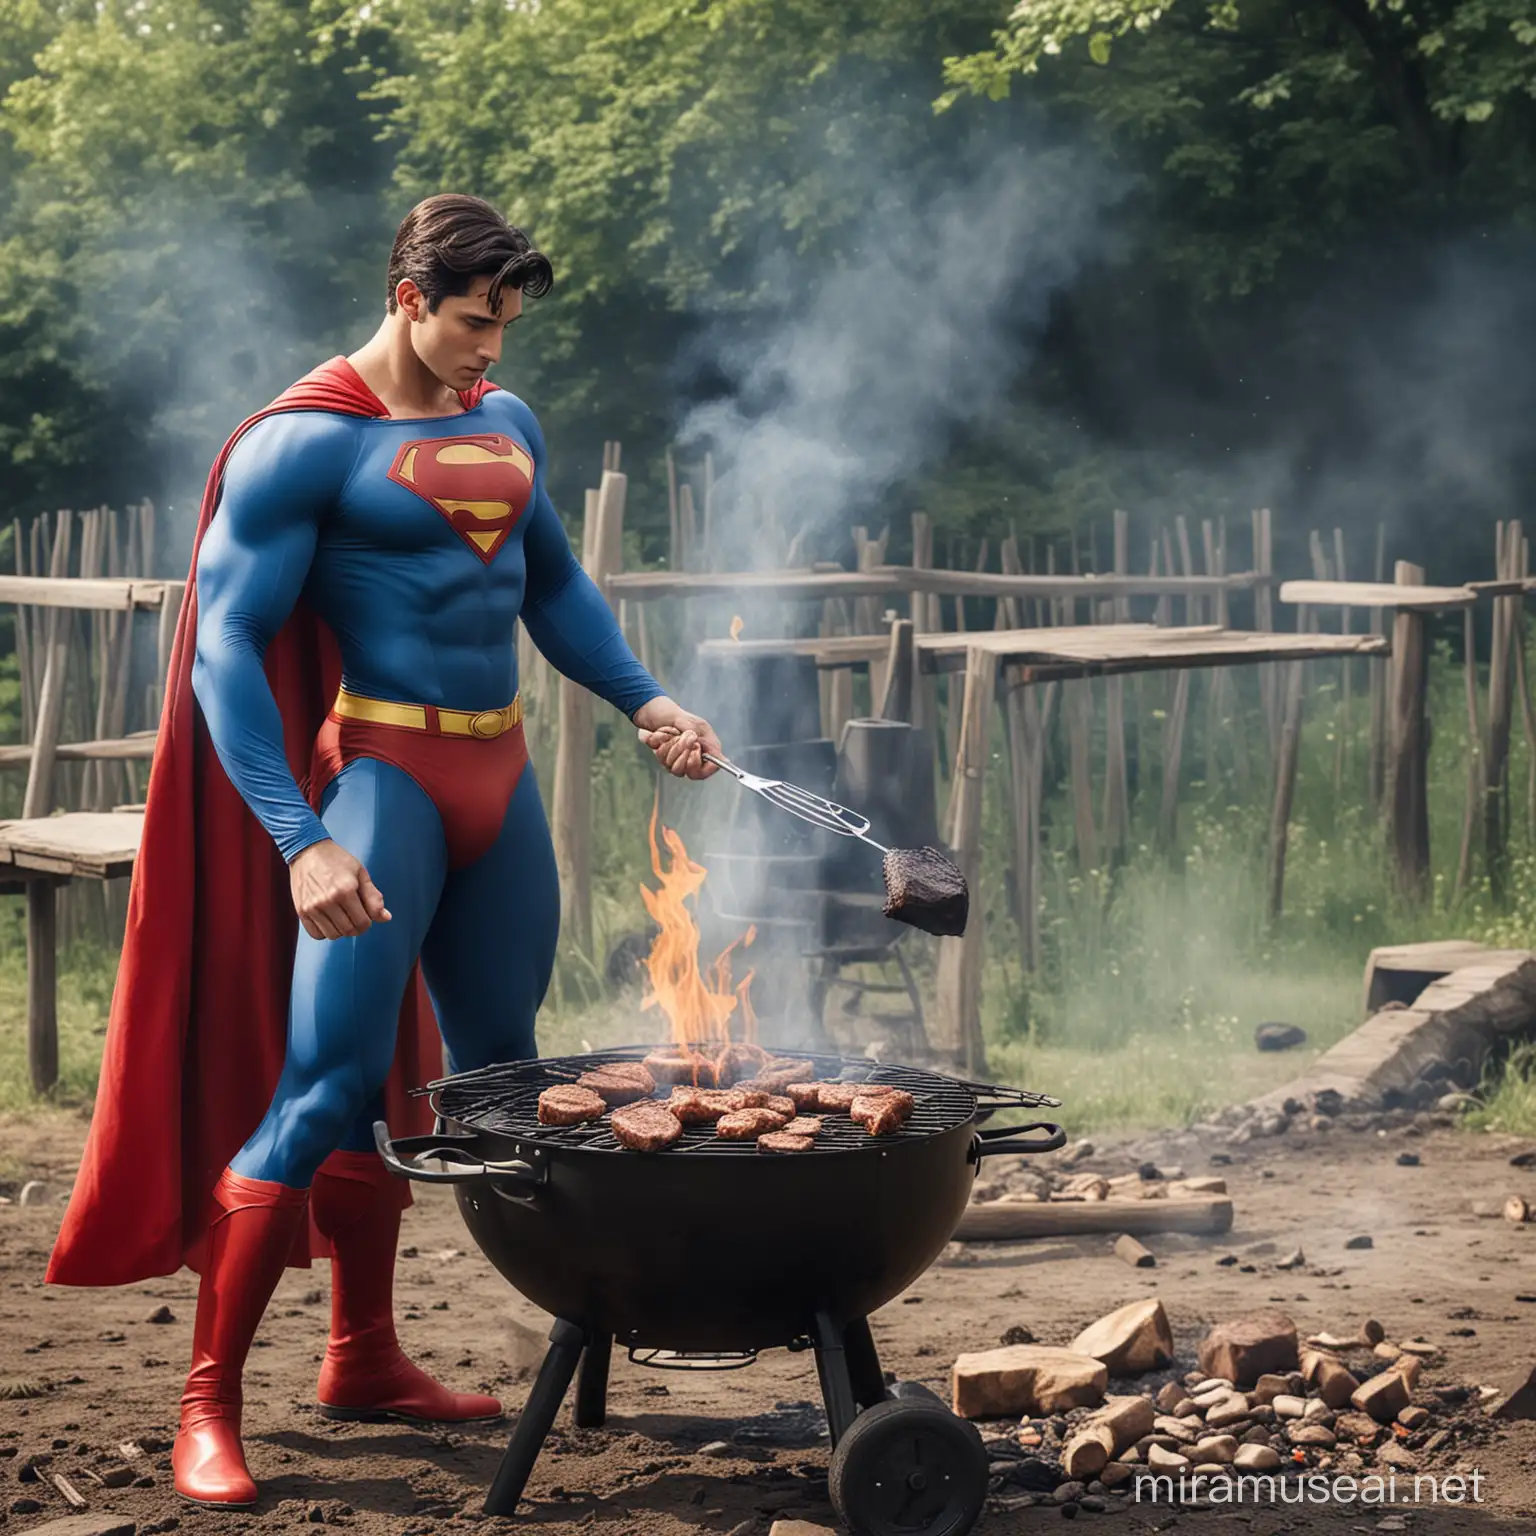 Super Man is making barbecue